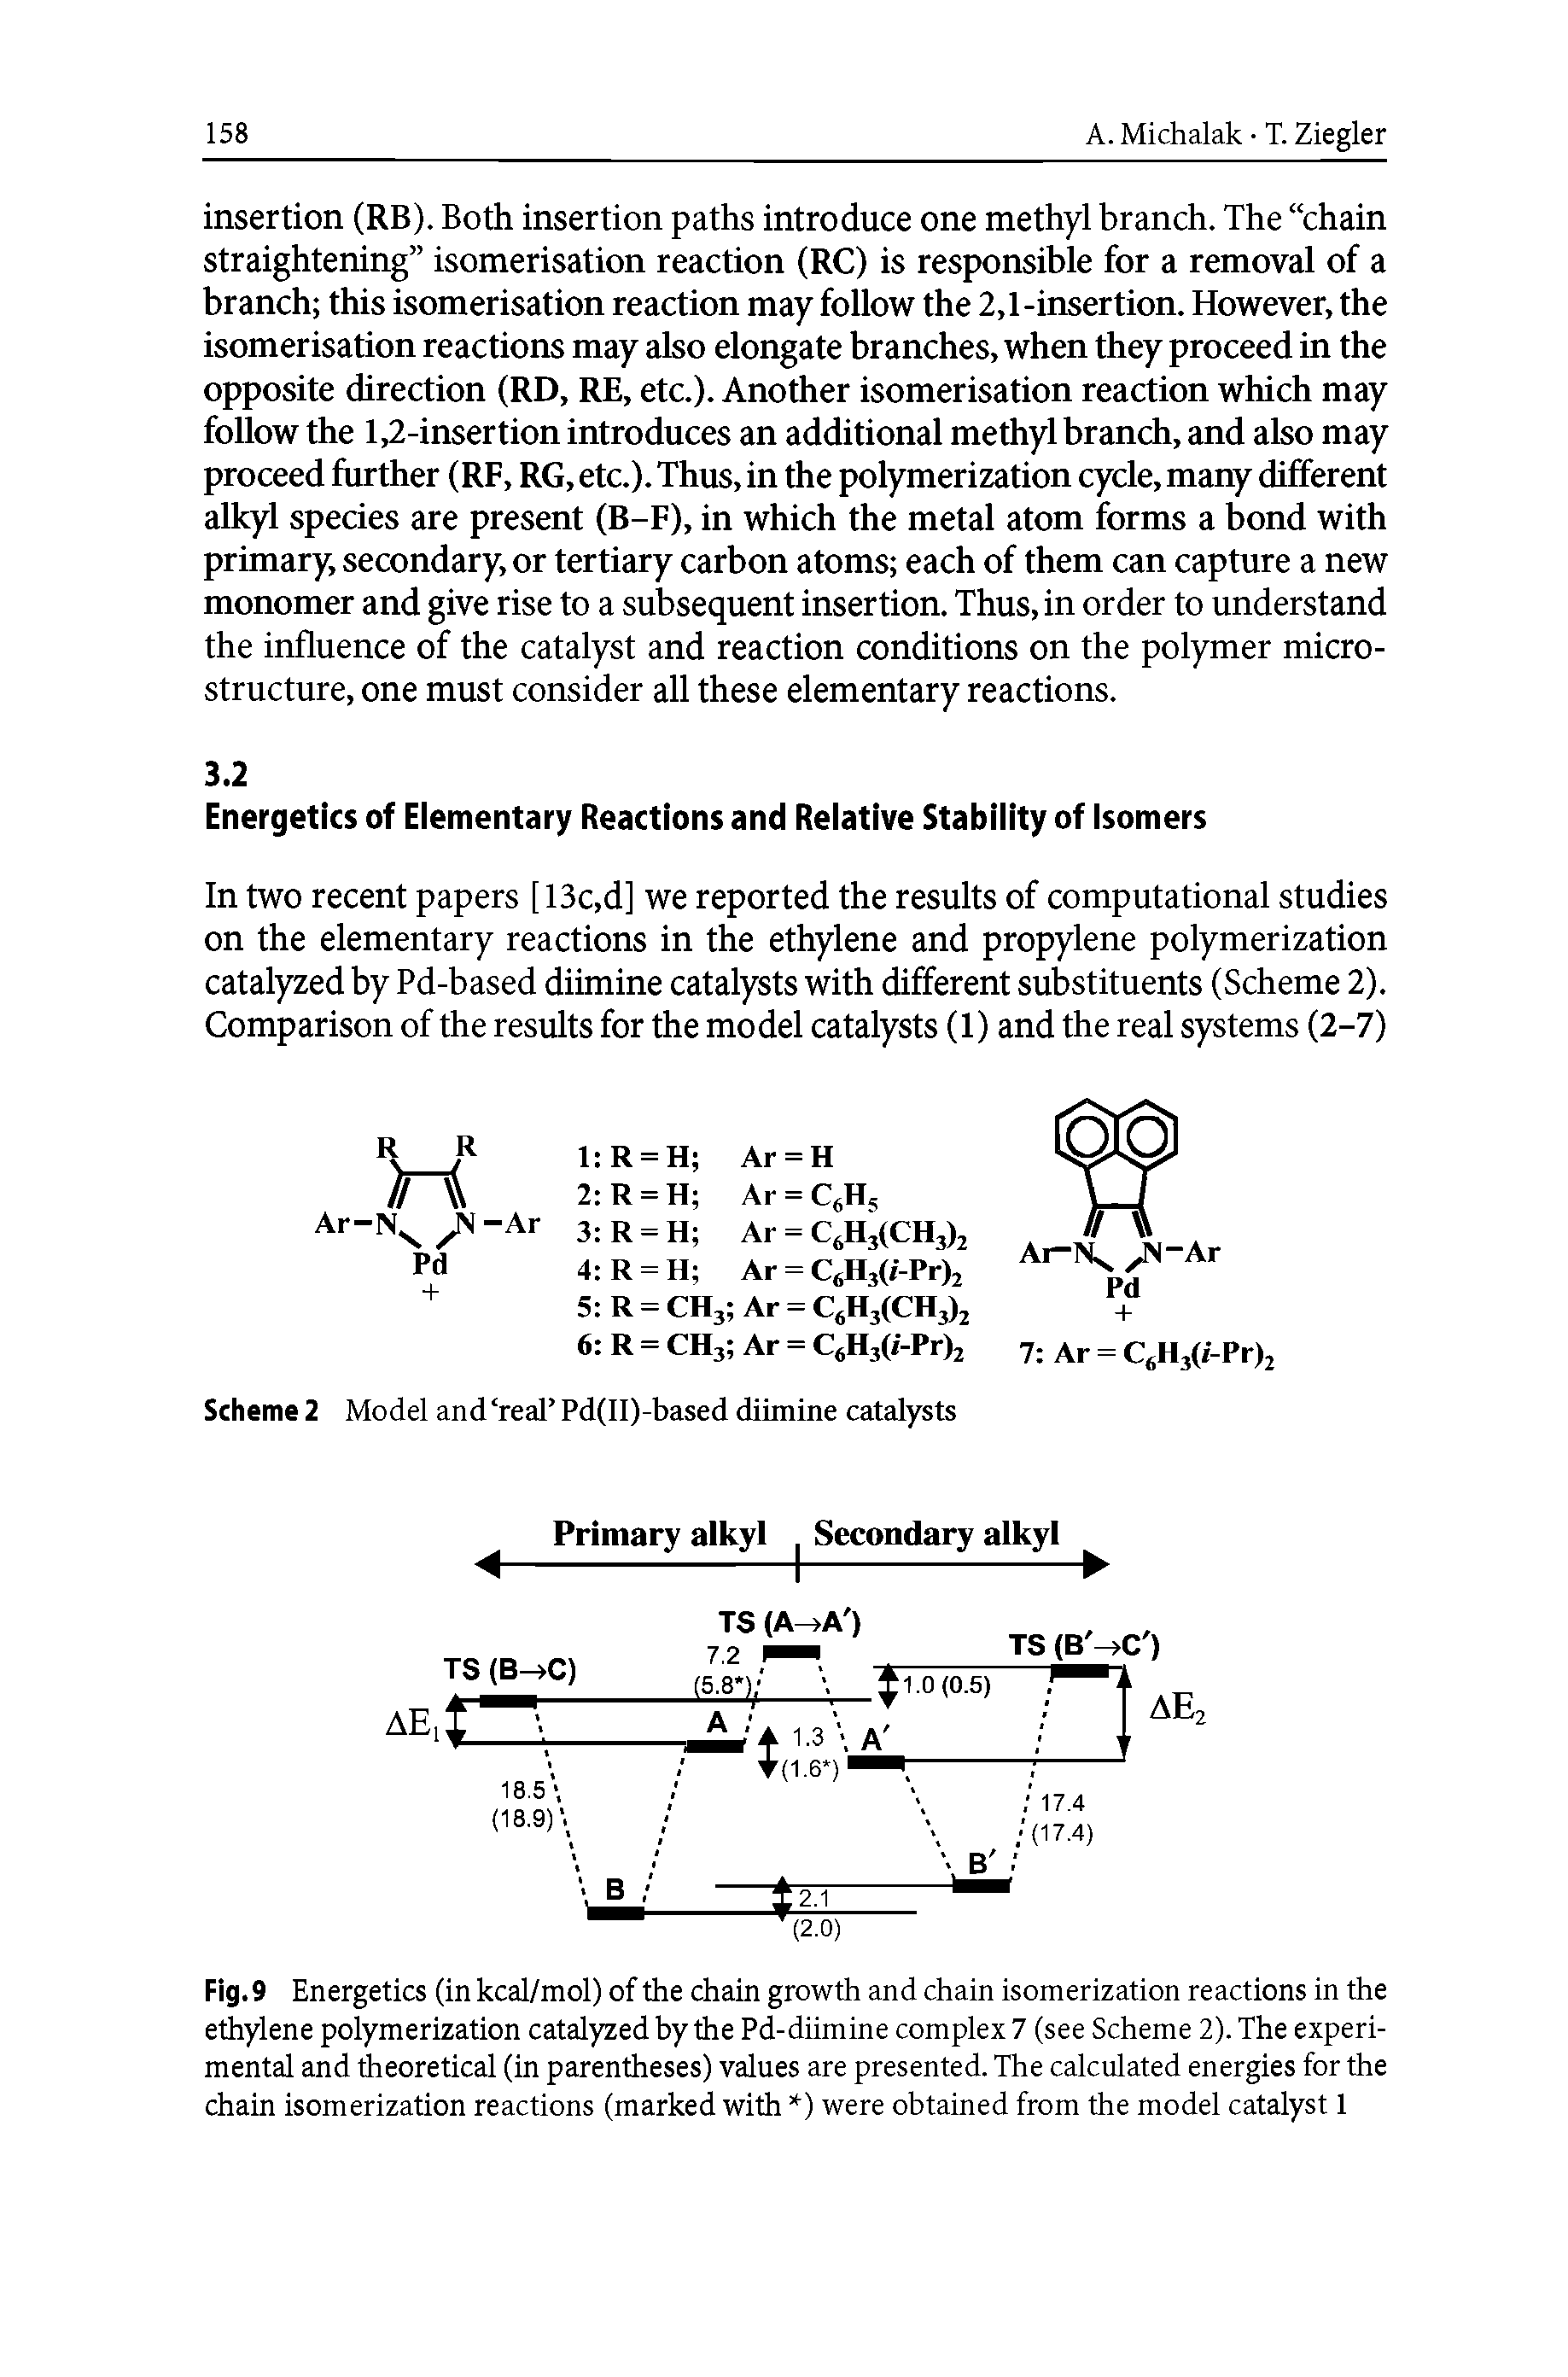 Fig. 9 Energetics (in kcal/mol) of the chain growth and chain isomerization reactions in the ethylene polymerization catalyzed hy the Pd-diimine complex 7 (see Scheme 2). The experimental and theoretical (in parentheses) values are presented. The calculated energies for the chain isomerization reactions (marked with ) were obtained from the model catalyst 1...